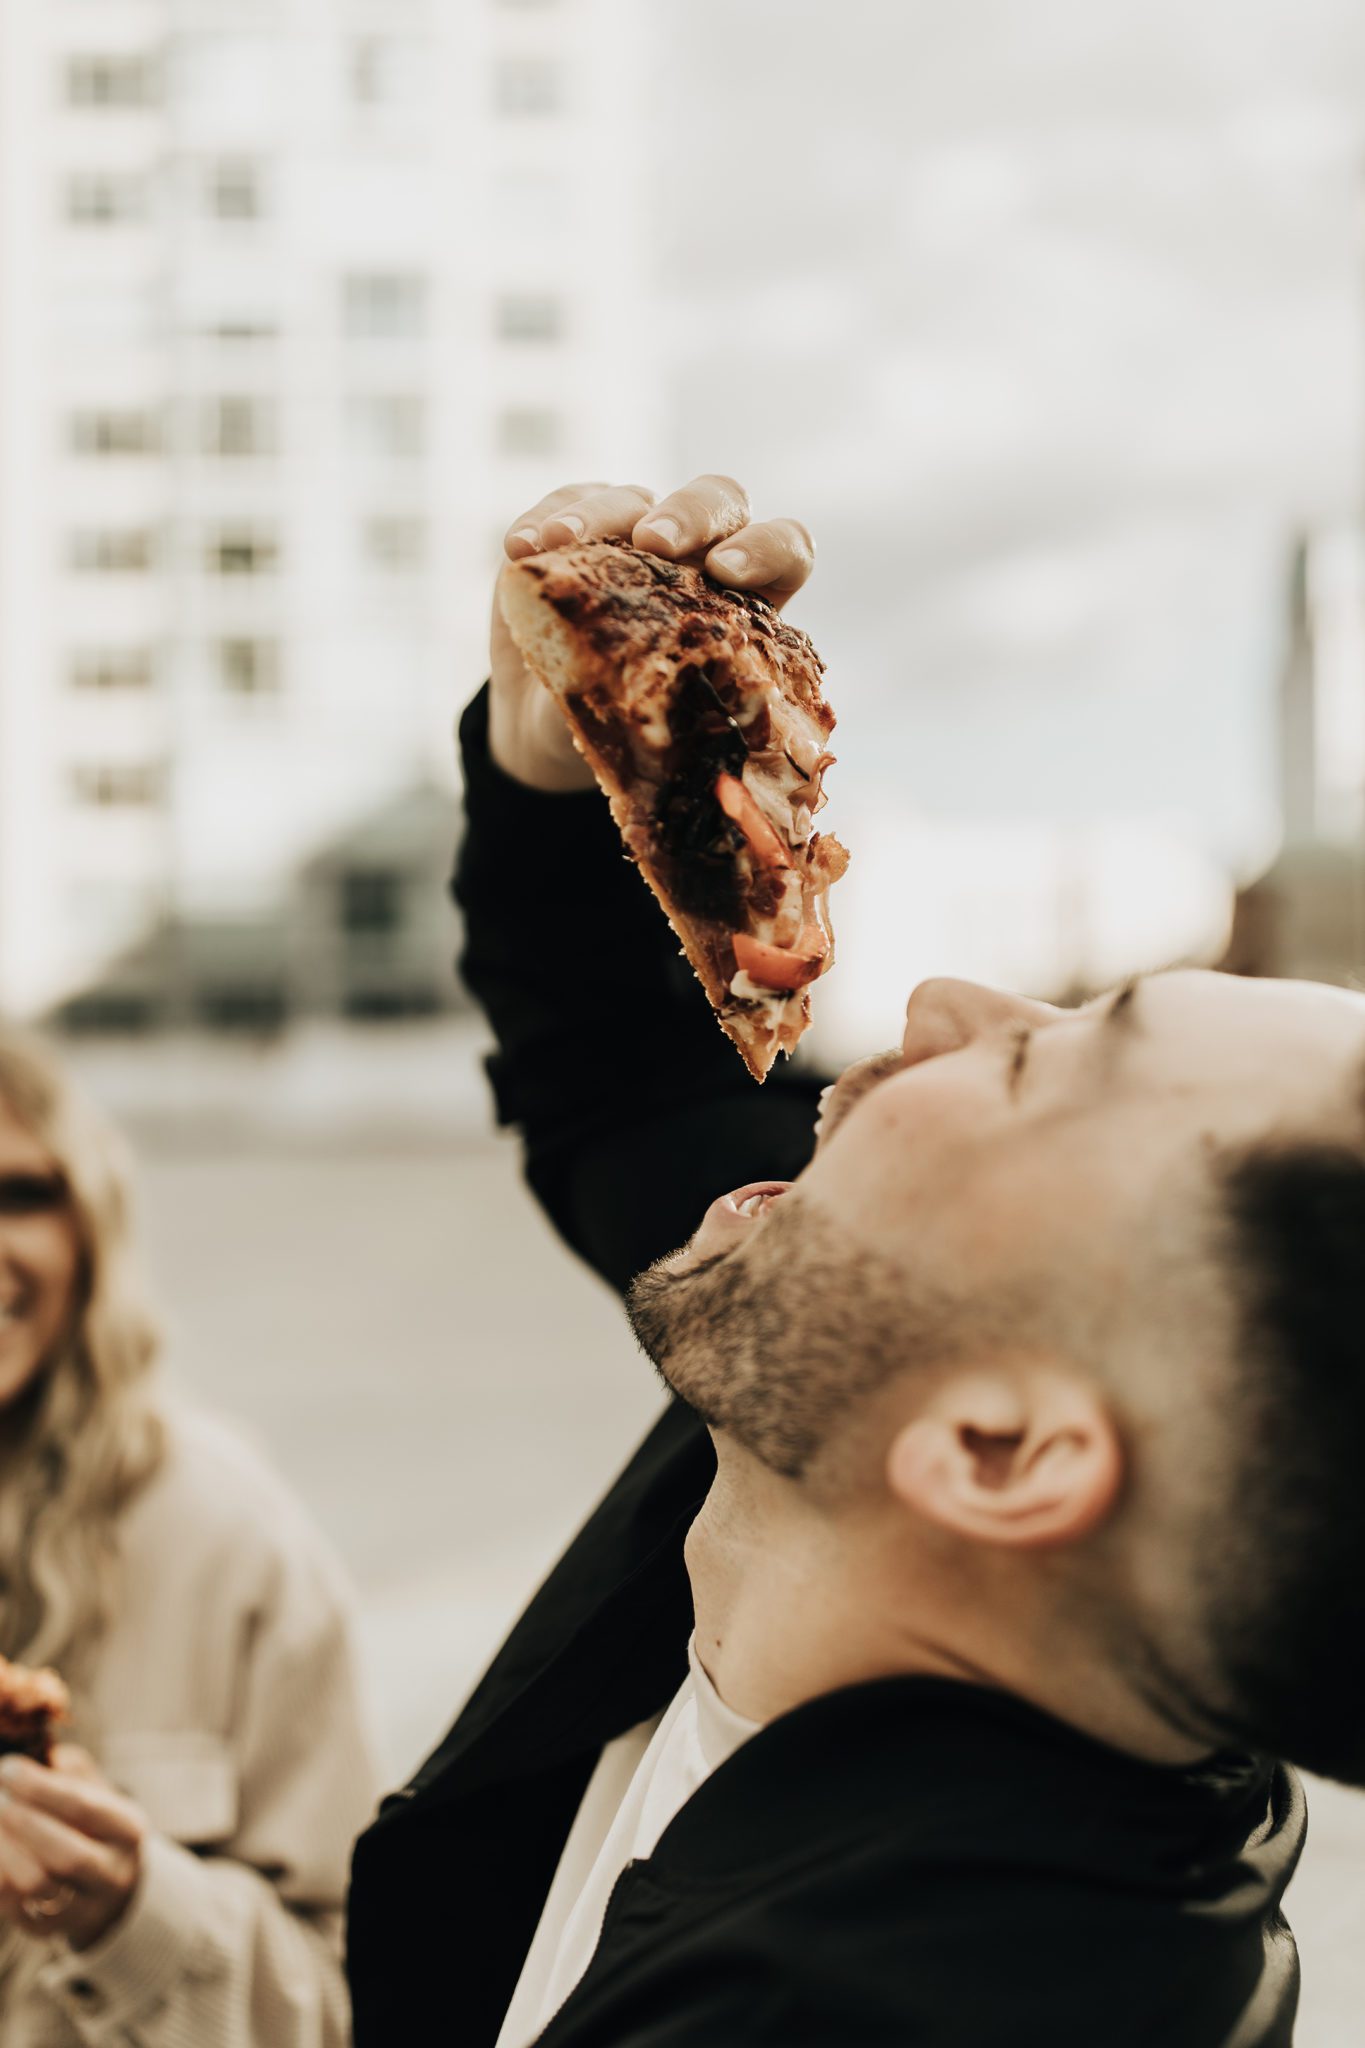 Man eating pizza on a rooftop